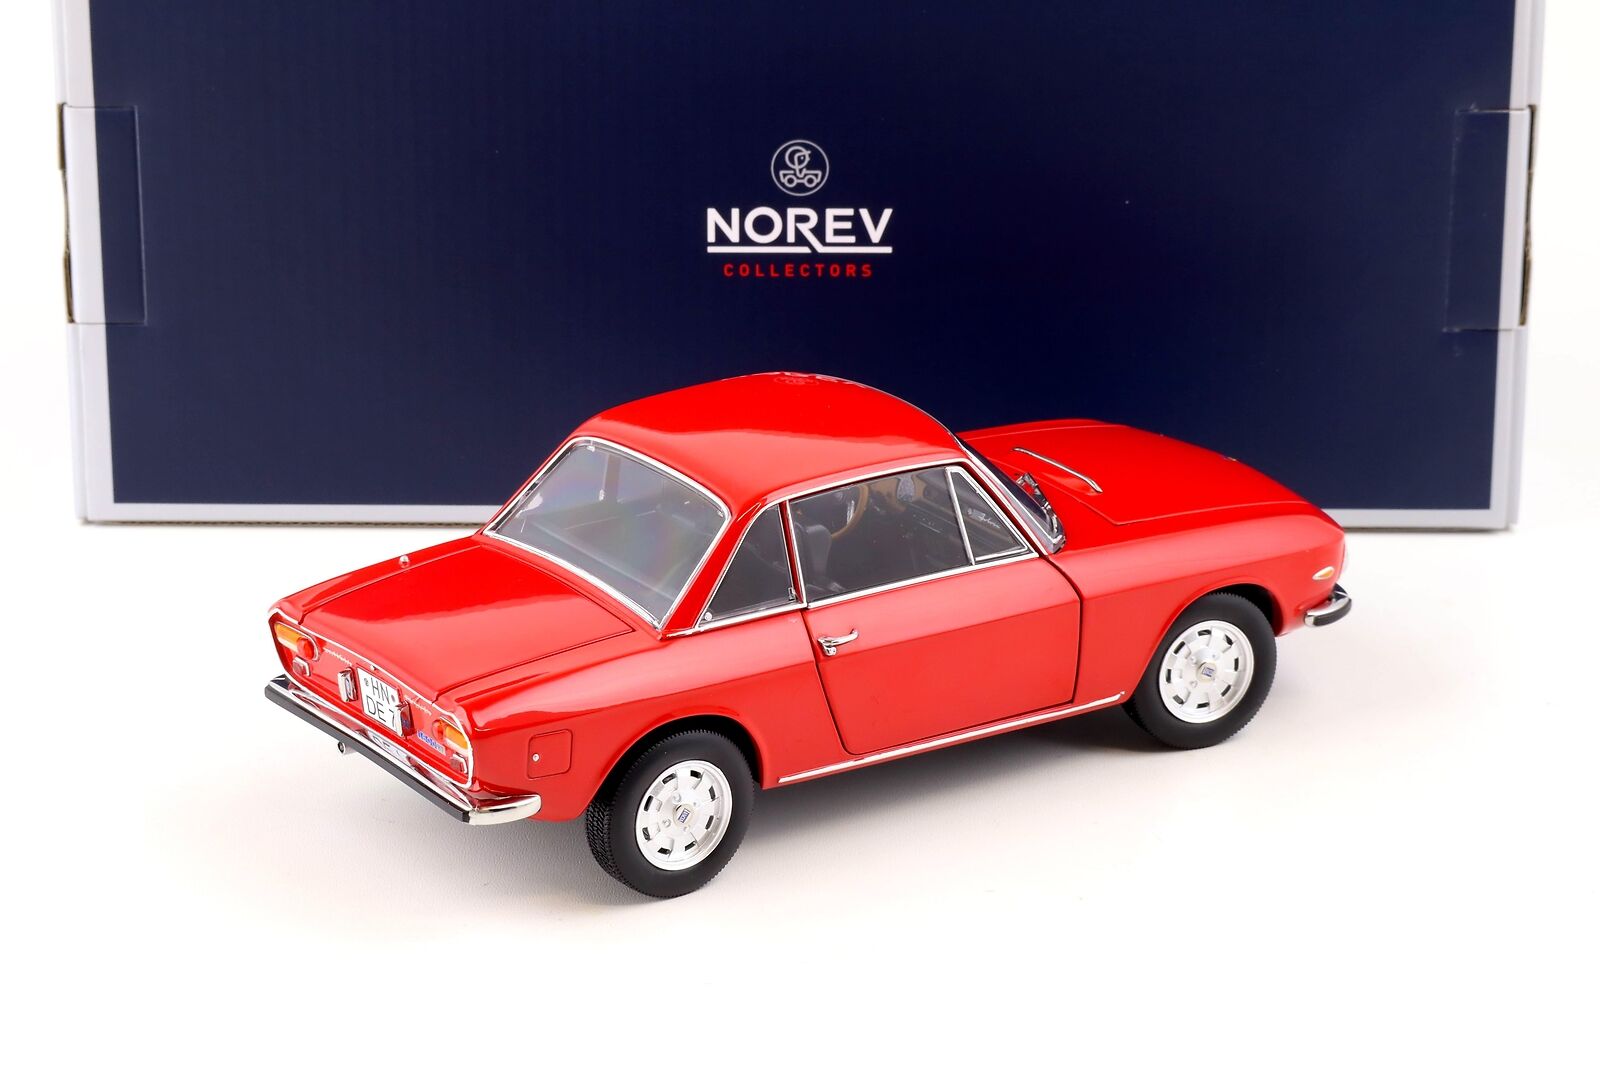 118 Norev Lancia Fulvia 1600 HF Lusso 1971 red - Limited Edition 1000 pcs.